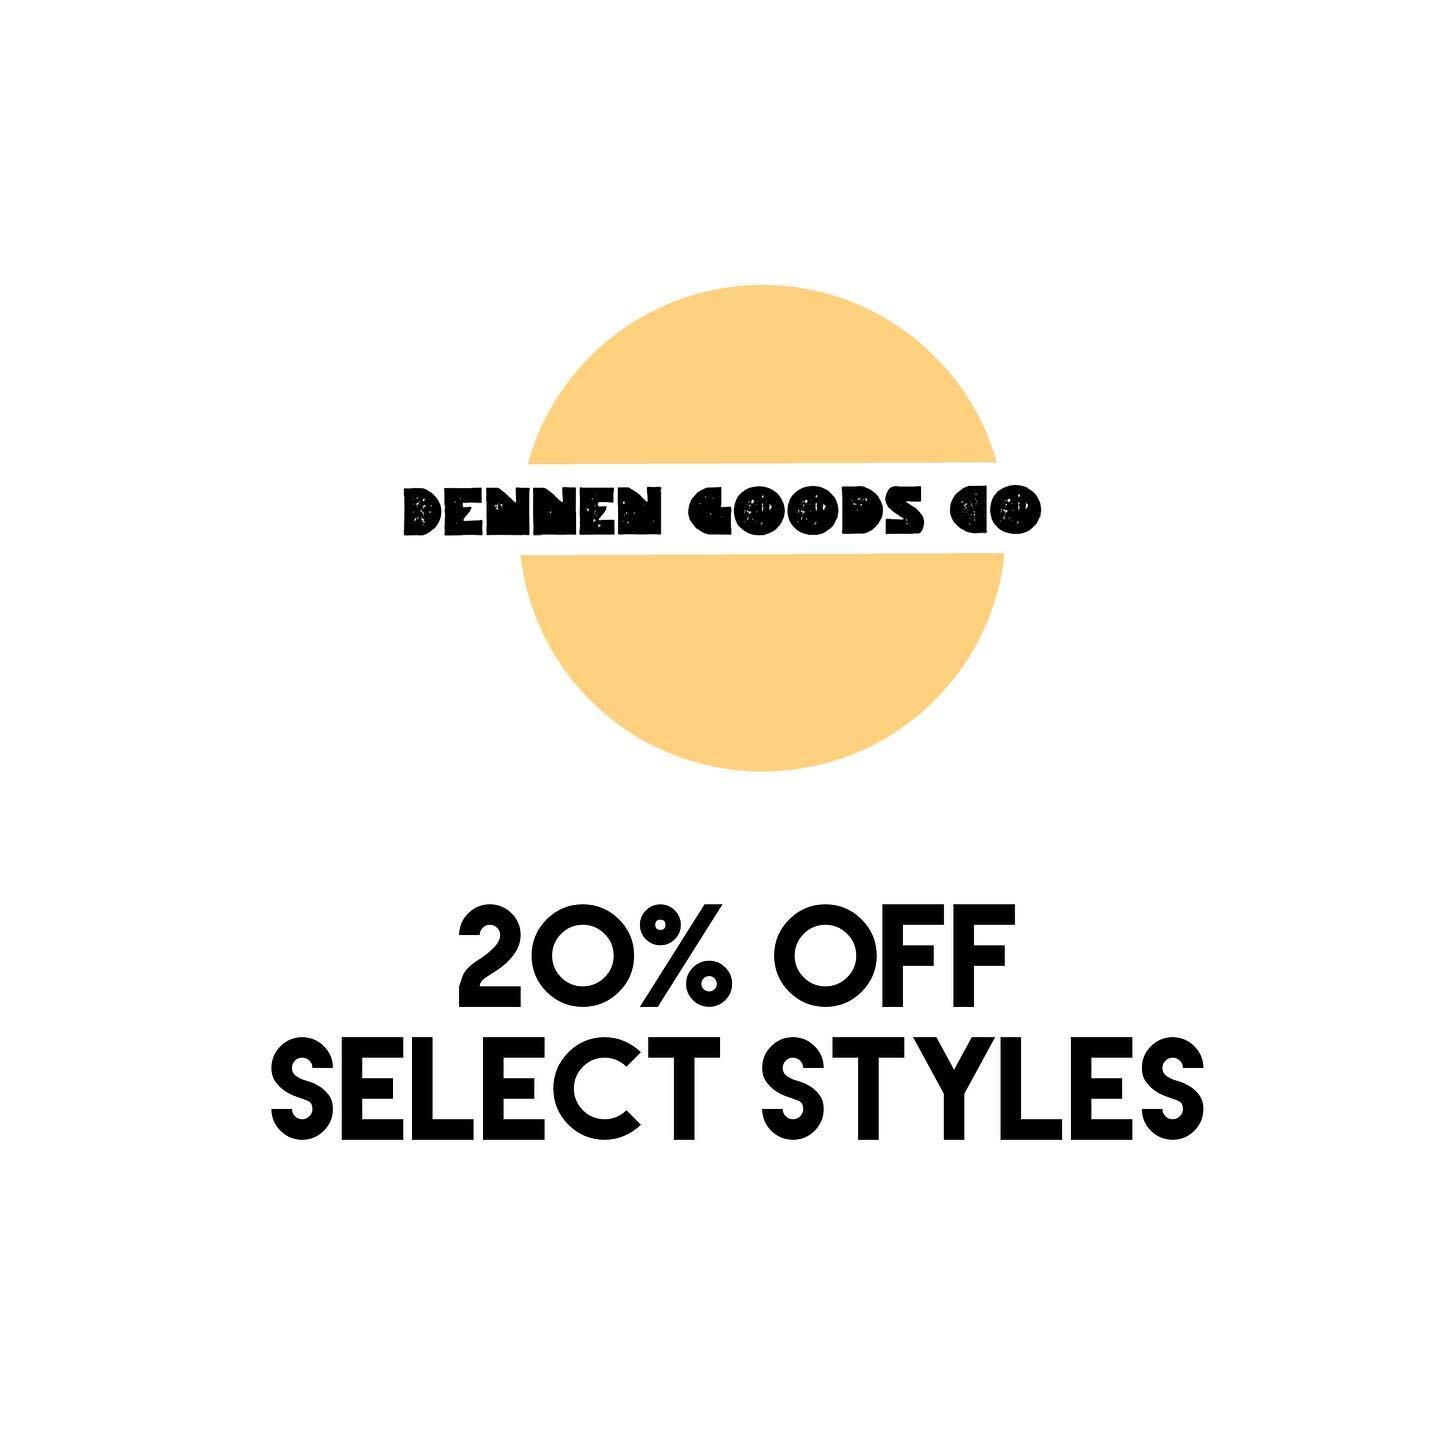 Looking to dress up your walls or starting your holiday shopping early? Now is your chance to snag that discount. Sale ends Sunday. 

#dennengoodsco #dennengoods #holidaysale #blackfriday #saleoftheseason #blessedisthislife #youwarmmysoul #betheone #